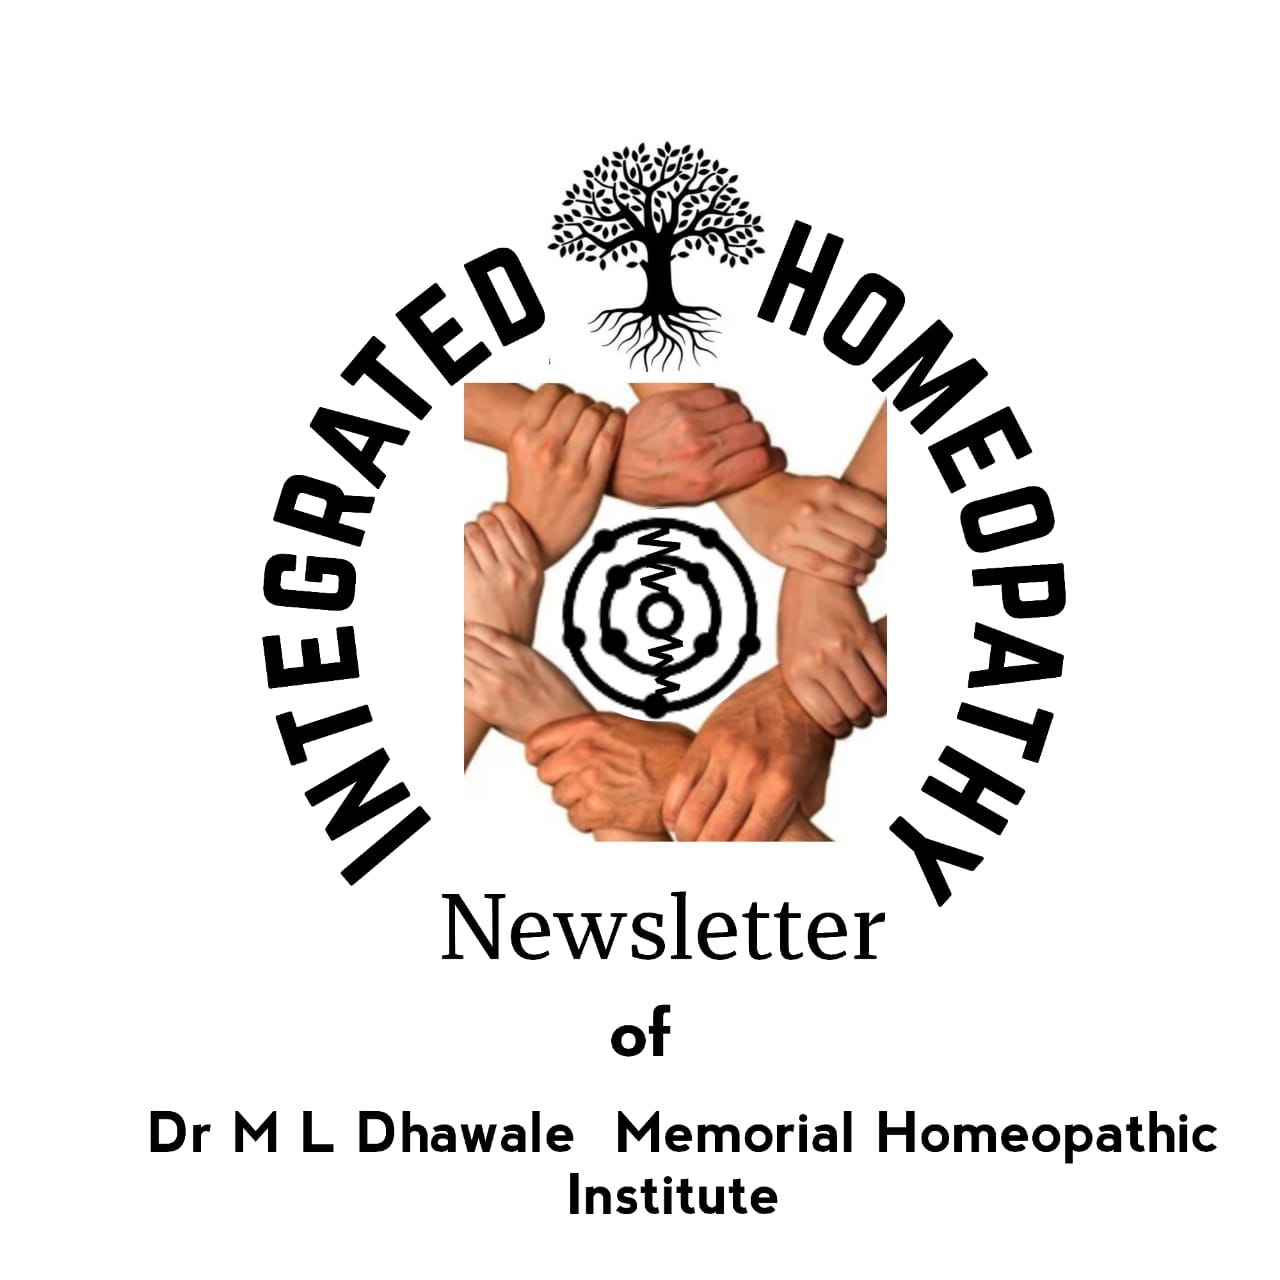 Integrated Homoeopathy Newsletter